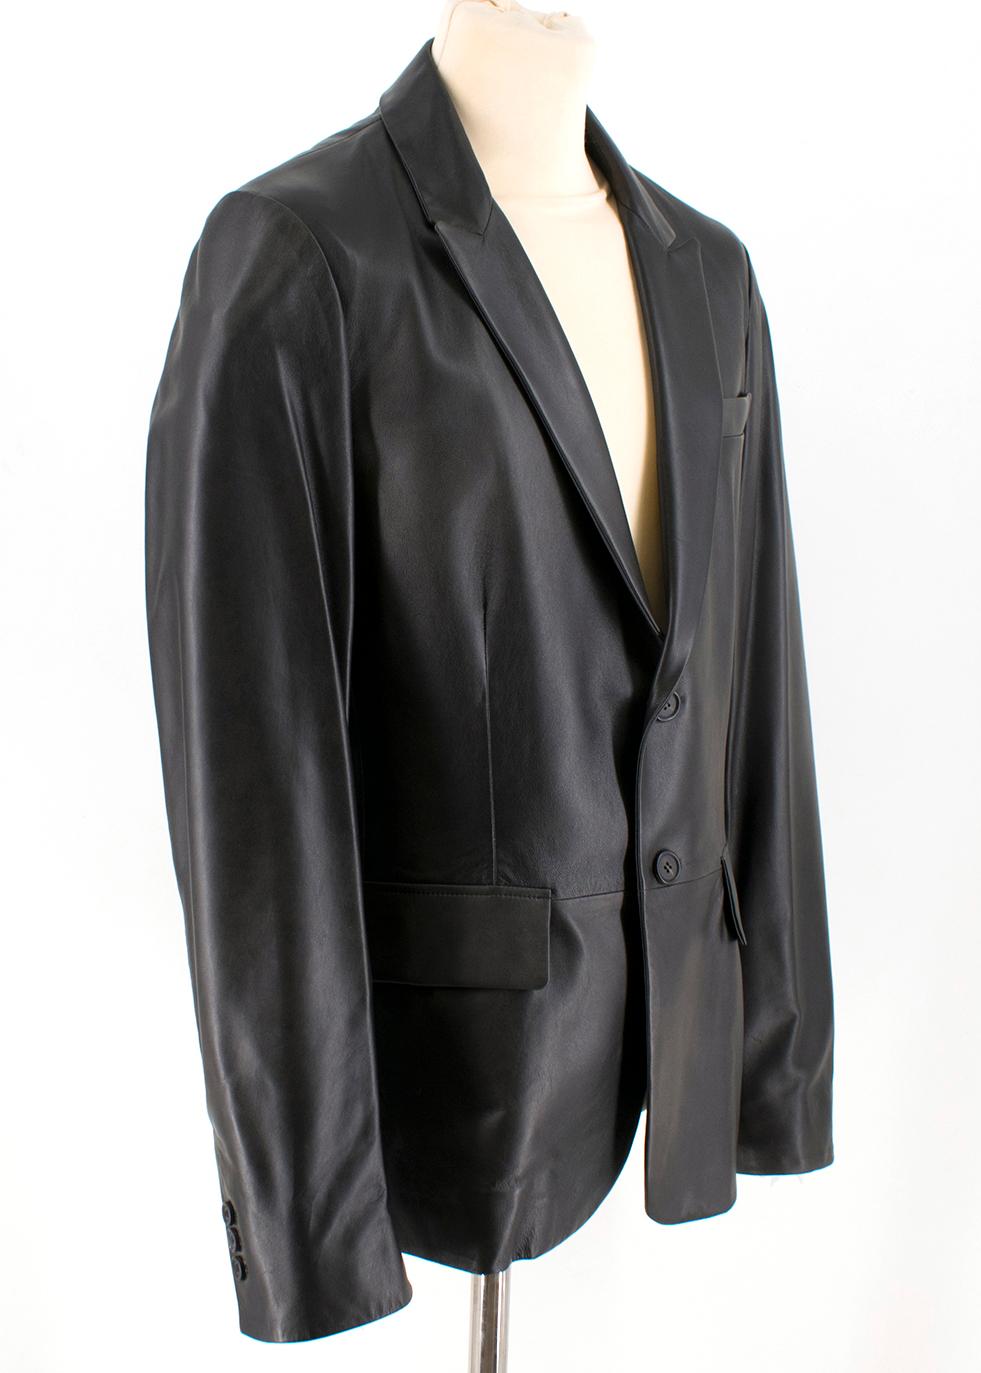 Prada black single-breasted 100% lamb skin blazer

- 2 front flapped pocket
- single-breasted buttons closure
- 2 inside pockets with buttons
- 100% viscose linings
- Leather brand label
- Made in Italy

Please note, these items are pre-owned and